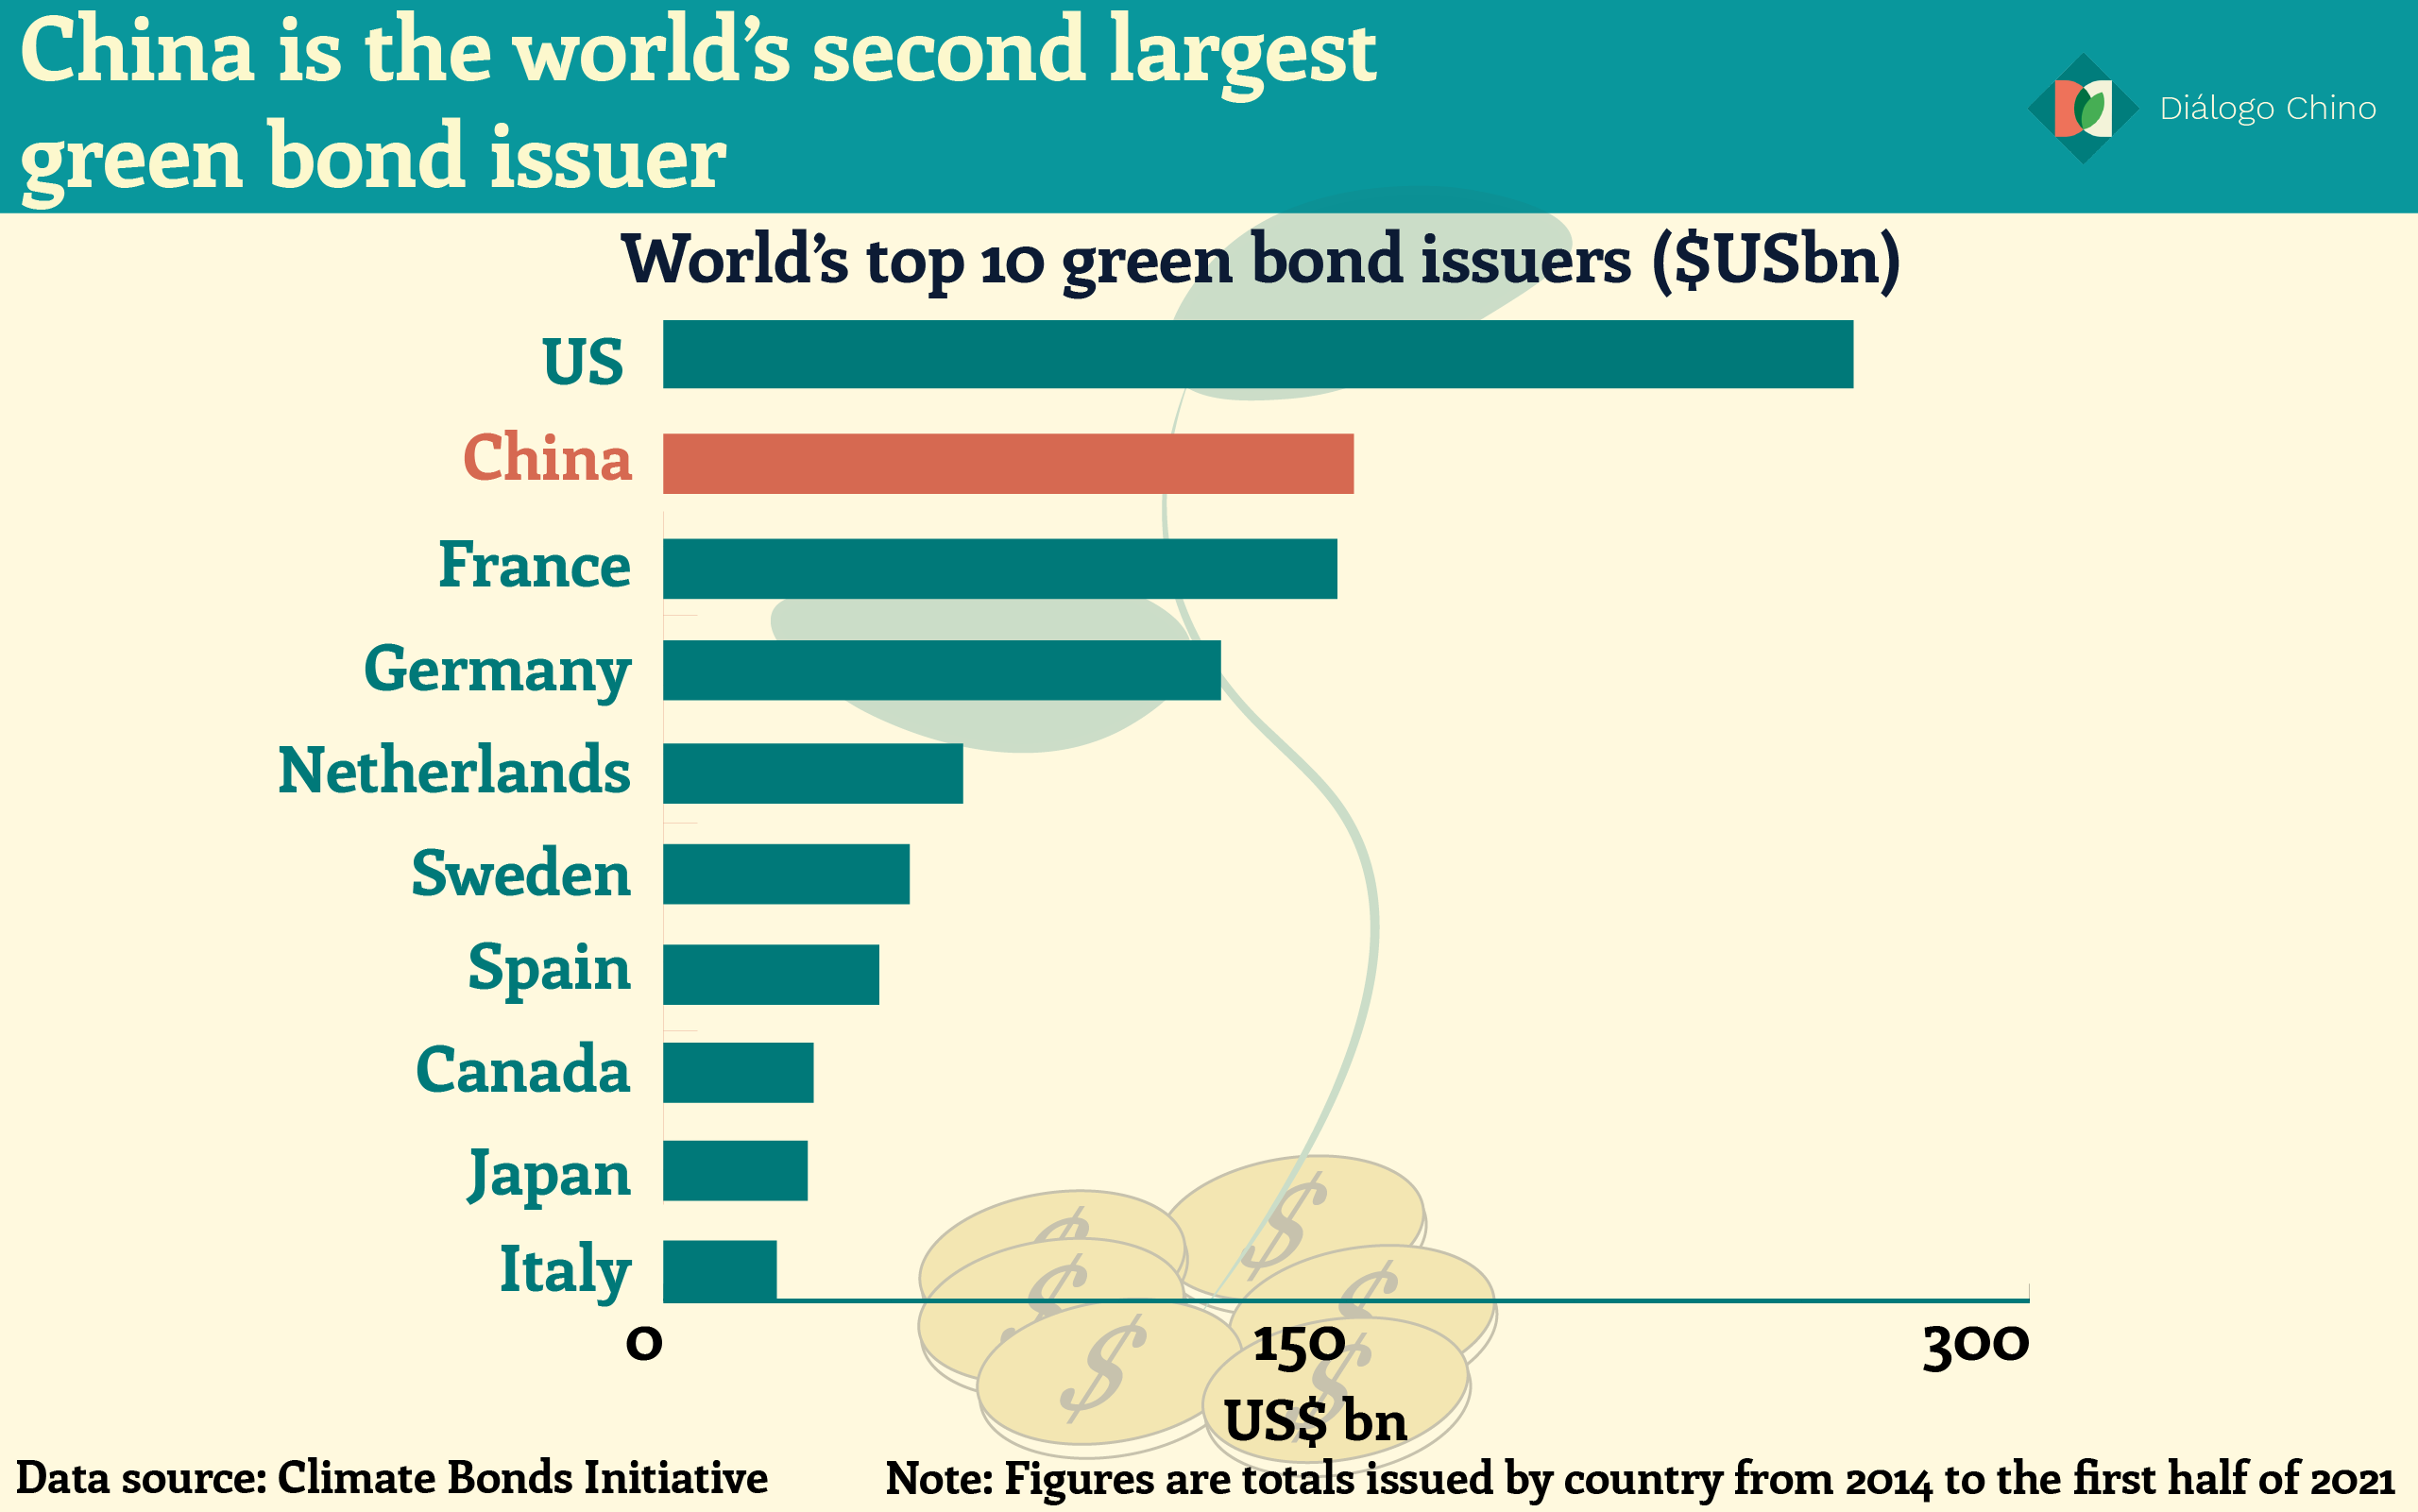 Bar chart showing the top 10 green bond issuing countries in the world